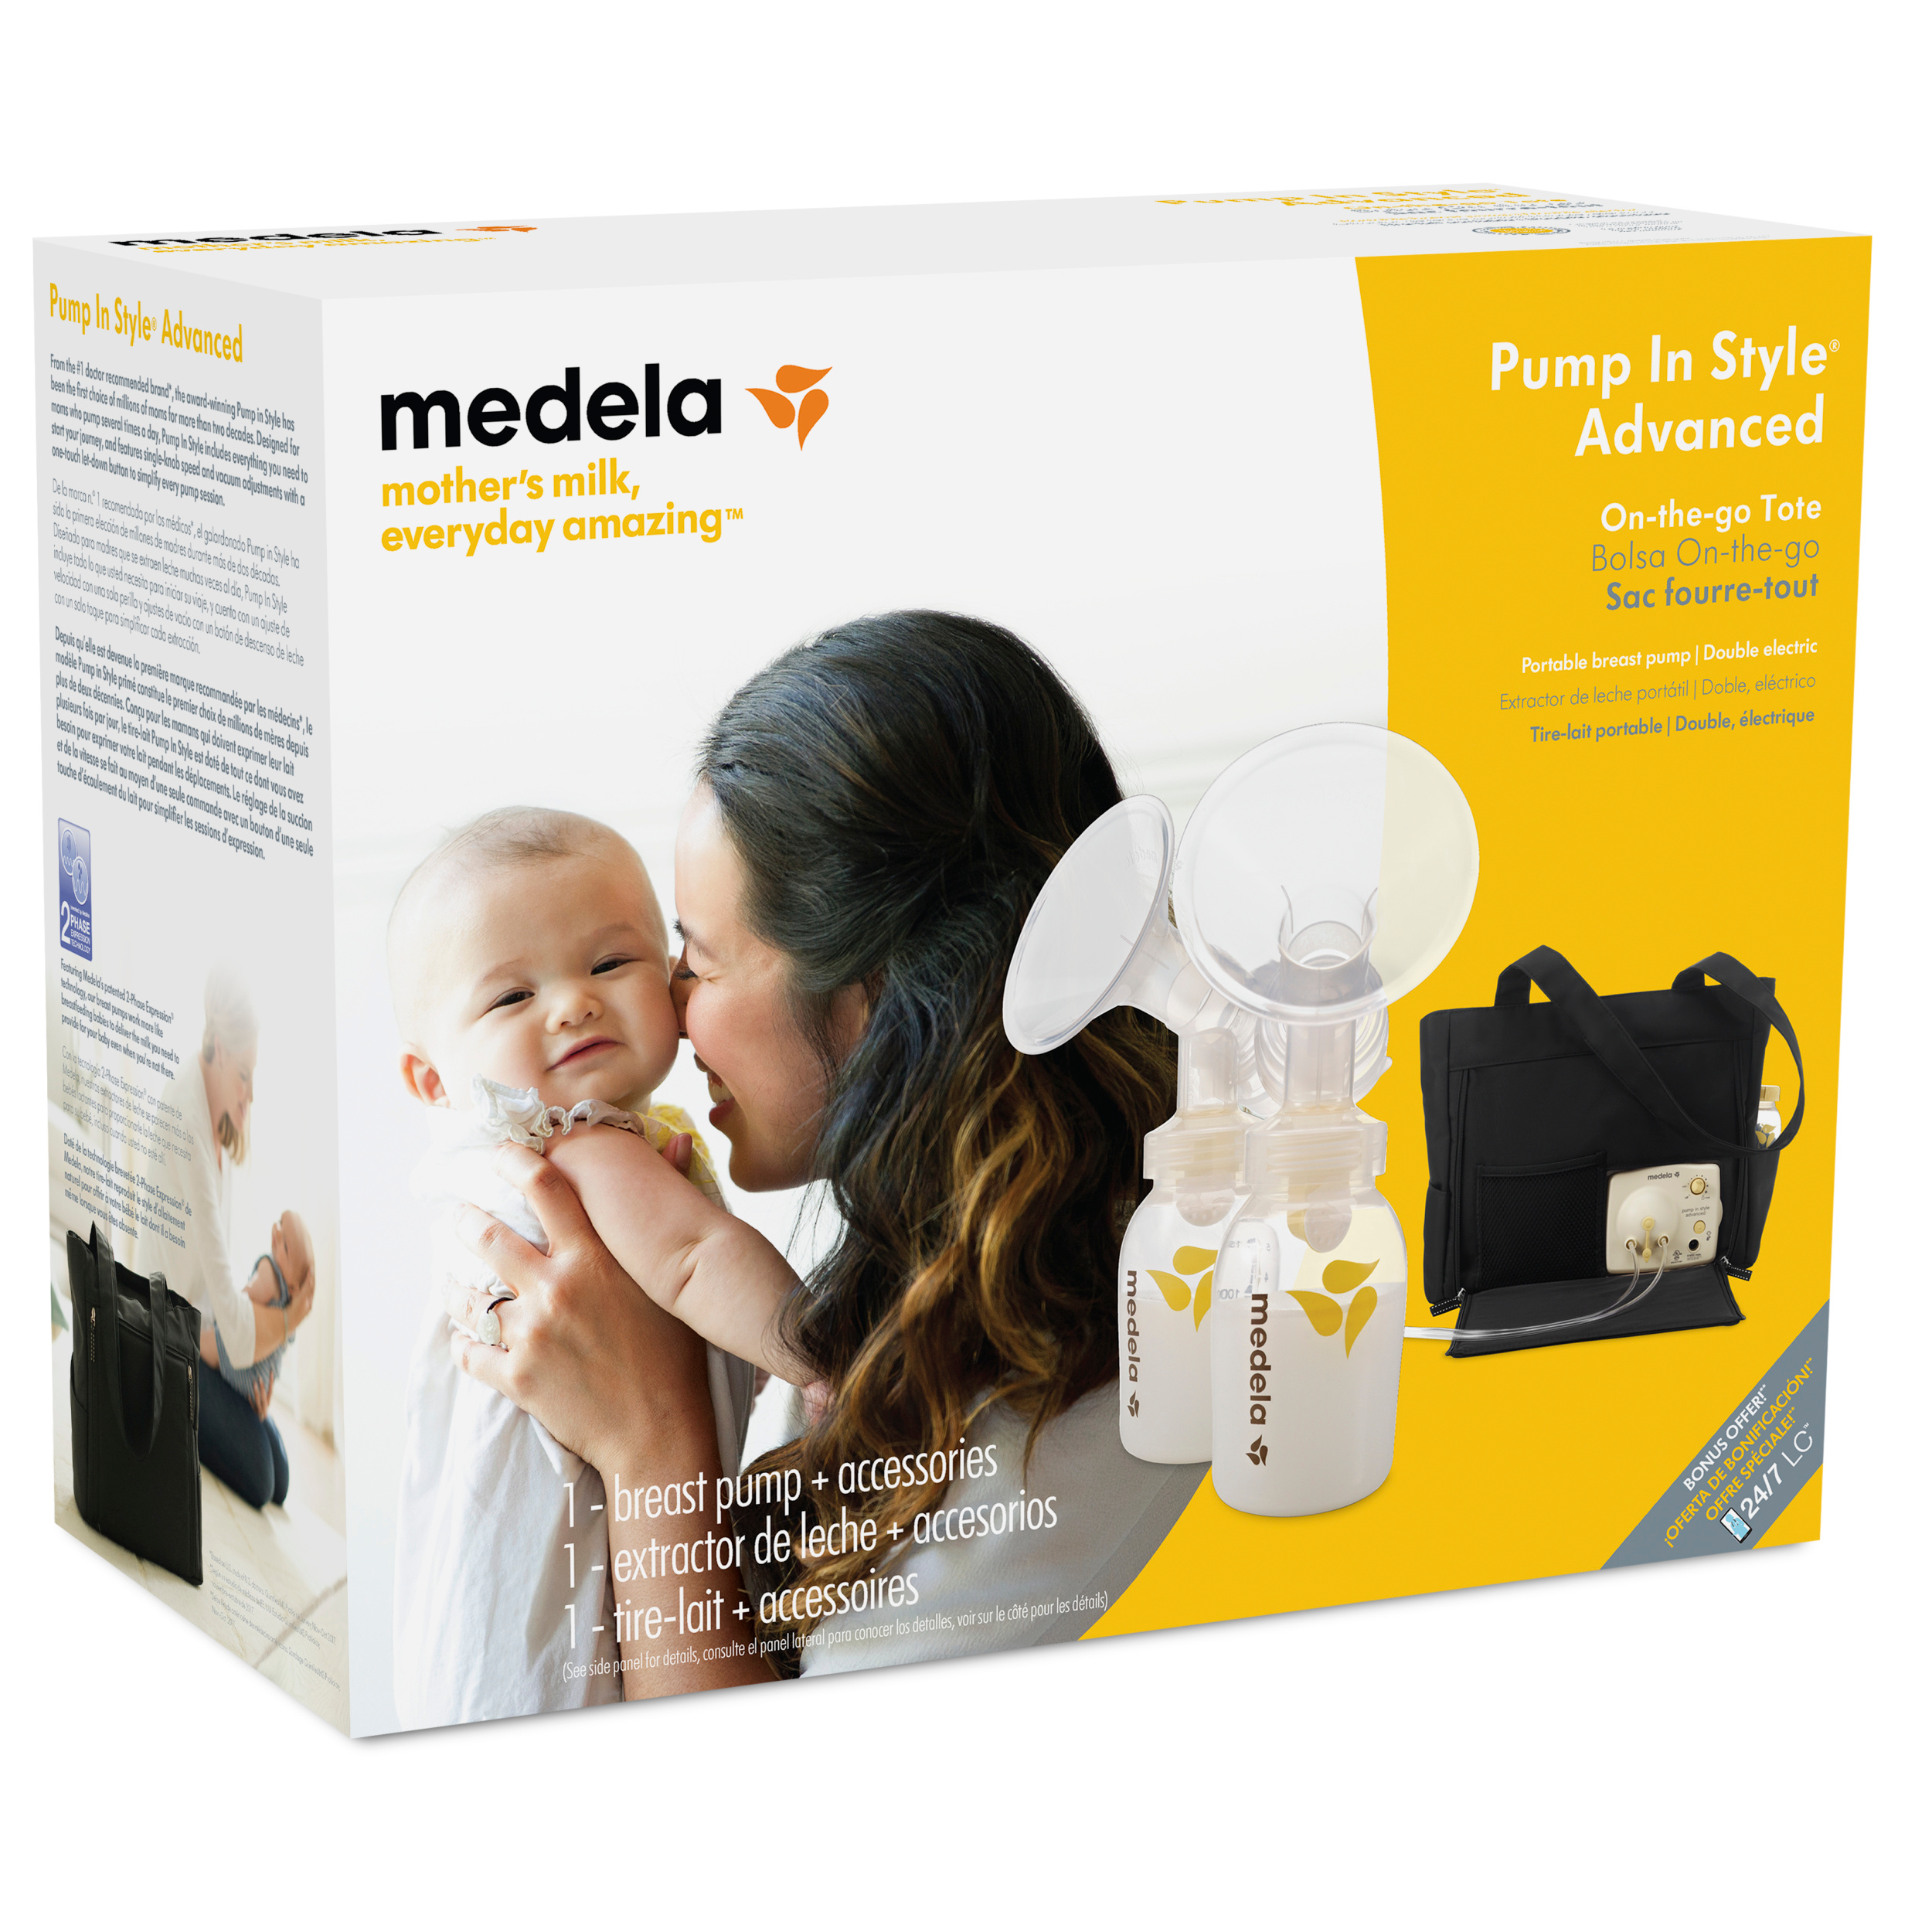 Medela Pump In Style Advanced Breast Pump with On-the-go Tote with International Adapter - image 3 of 9